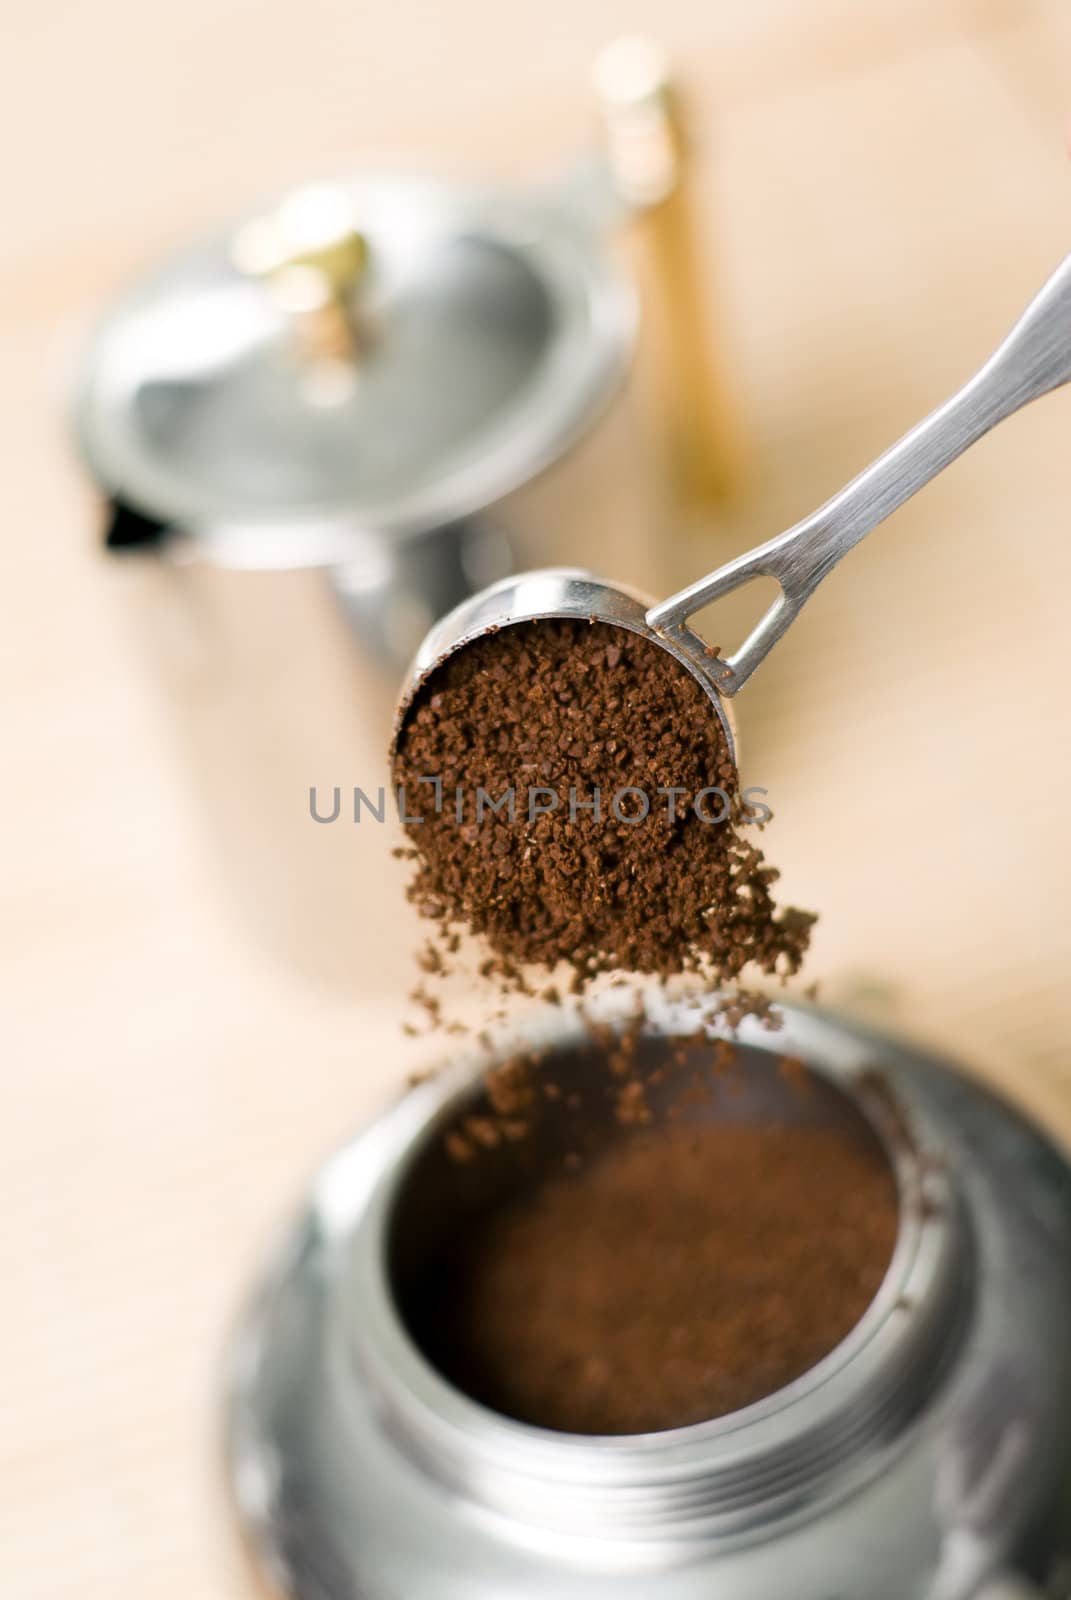 Pouring ground coffee (focus on it) into coffee maker. Shallow depth of field.